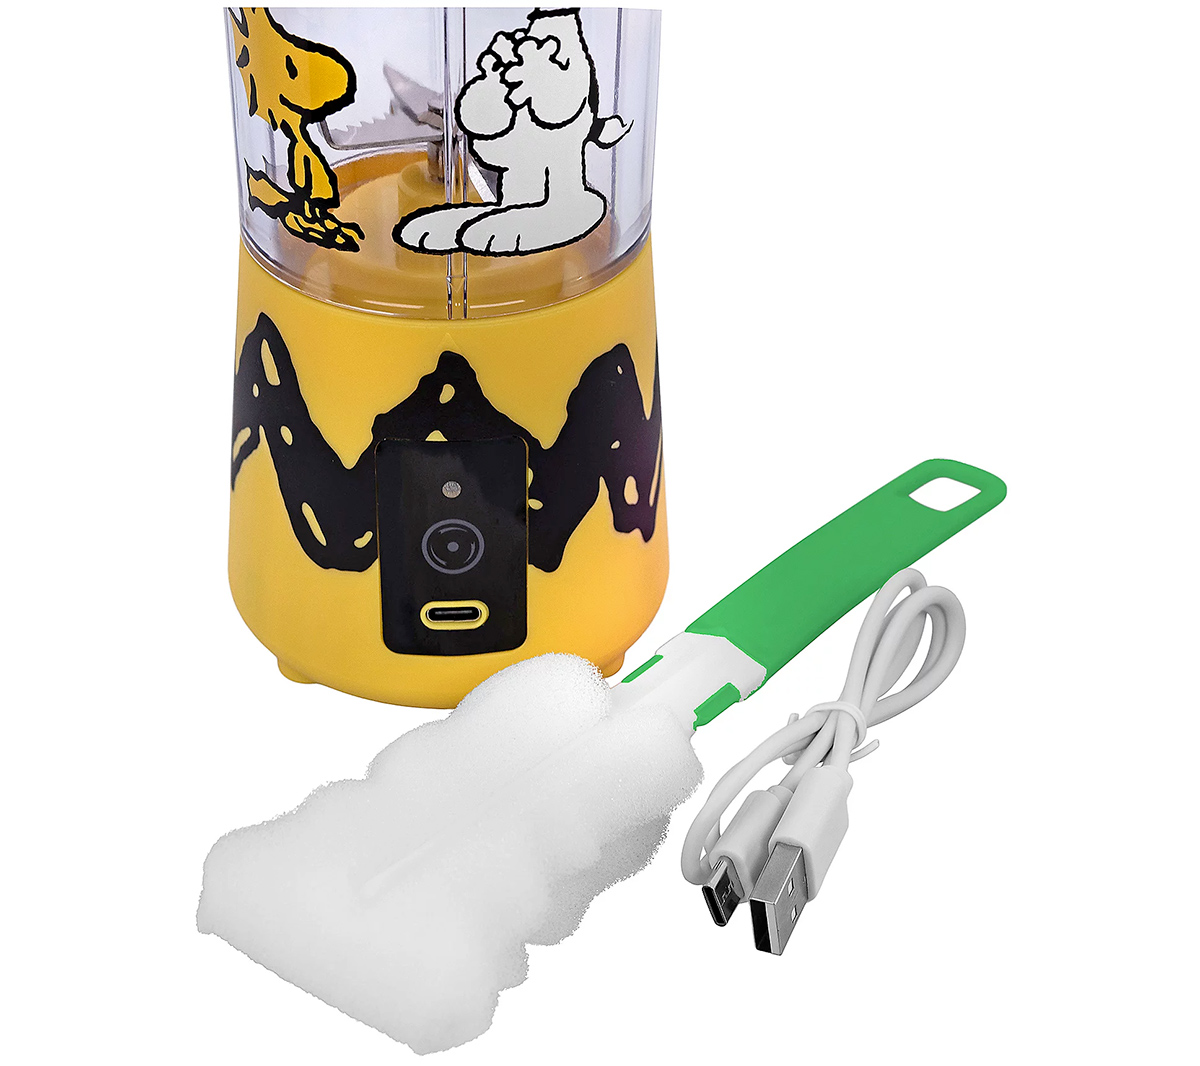 Peanuts Snoopy & Woodstock Mini Portable Blender with USB Rechargeable Battery